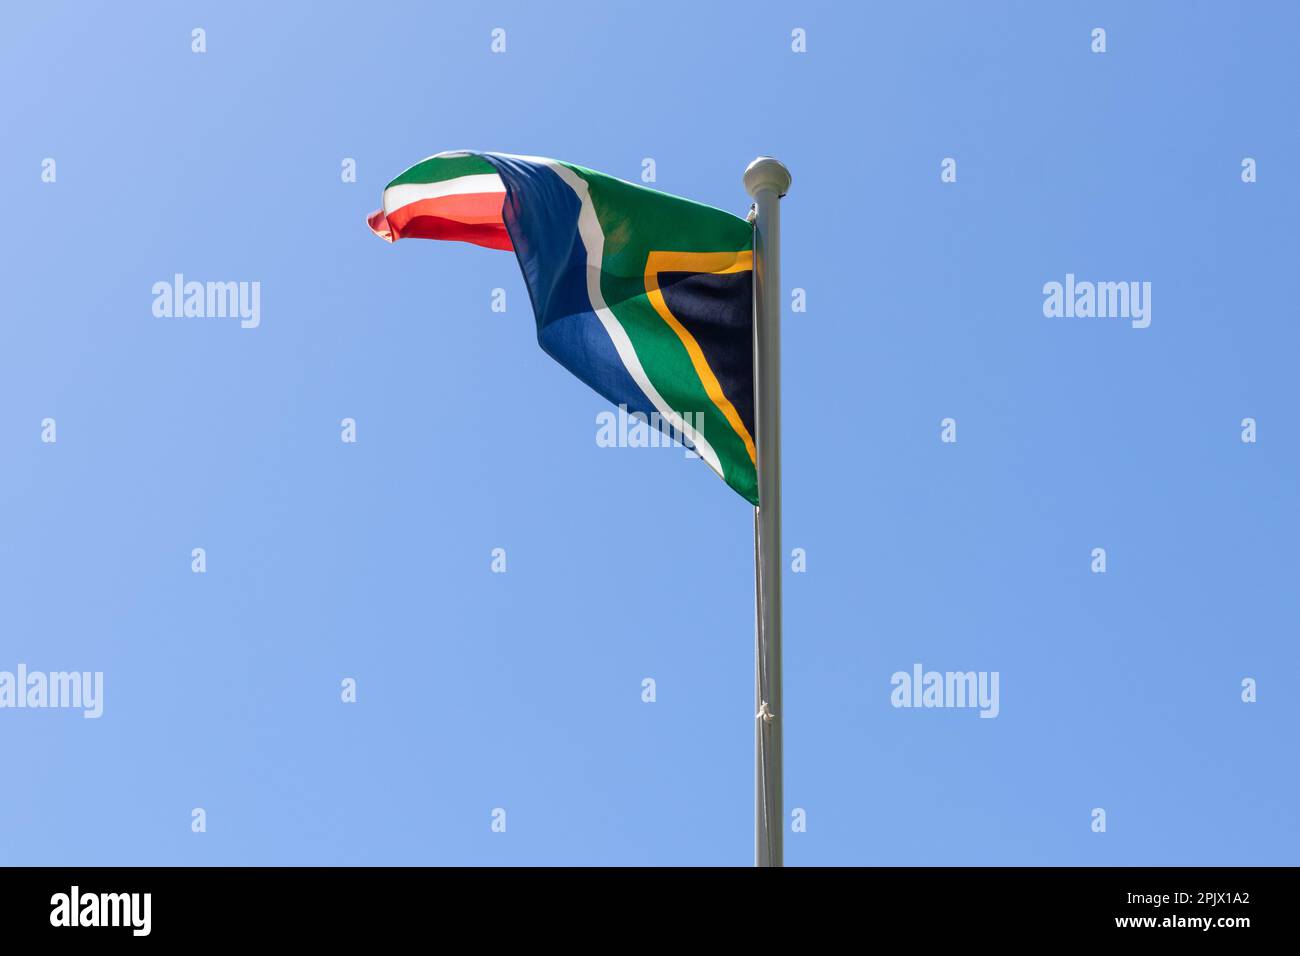 Flag of South Africa waving in the wind against a blue sky background Stock Photo